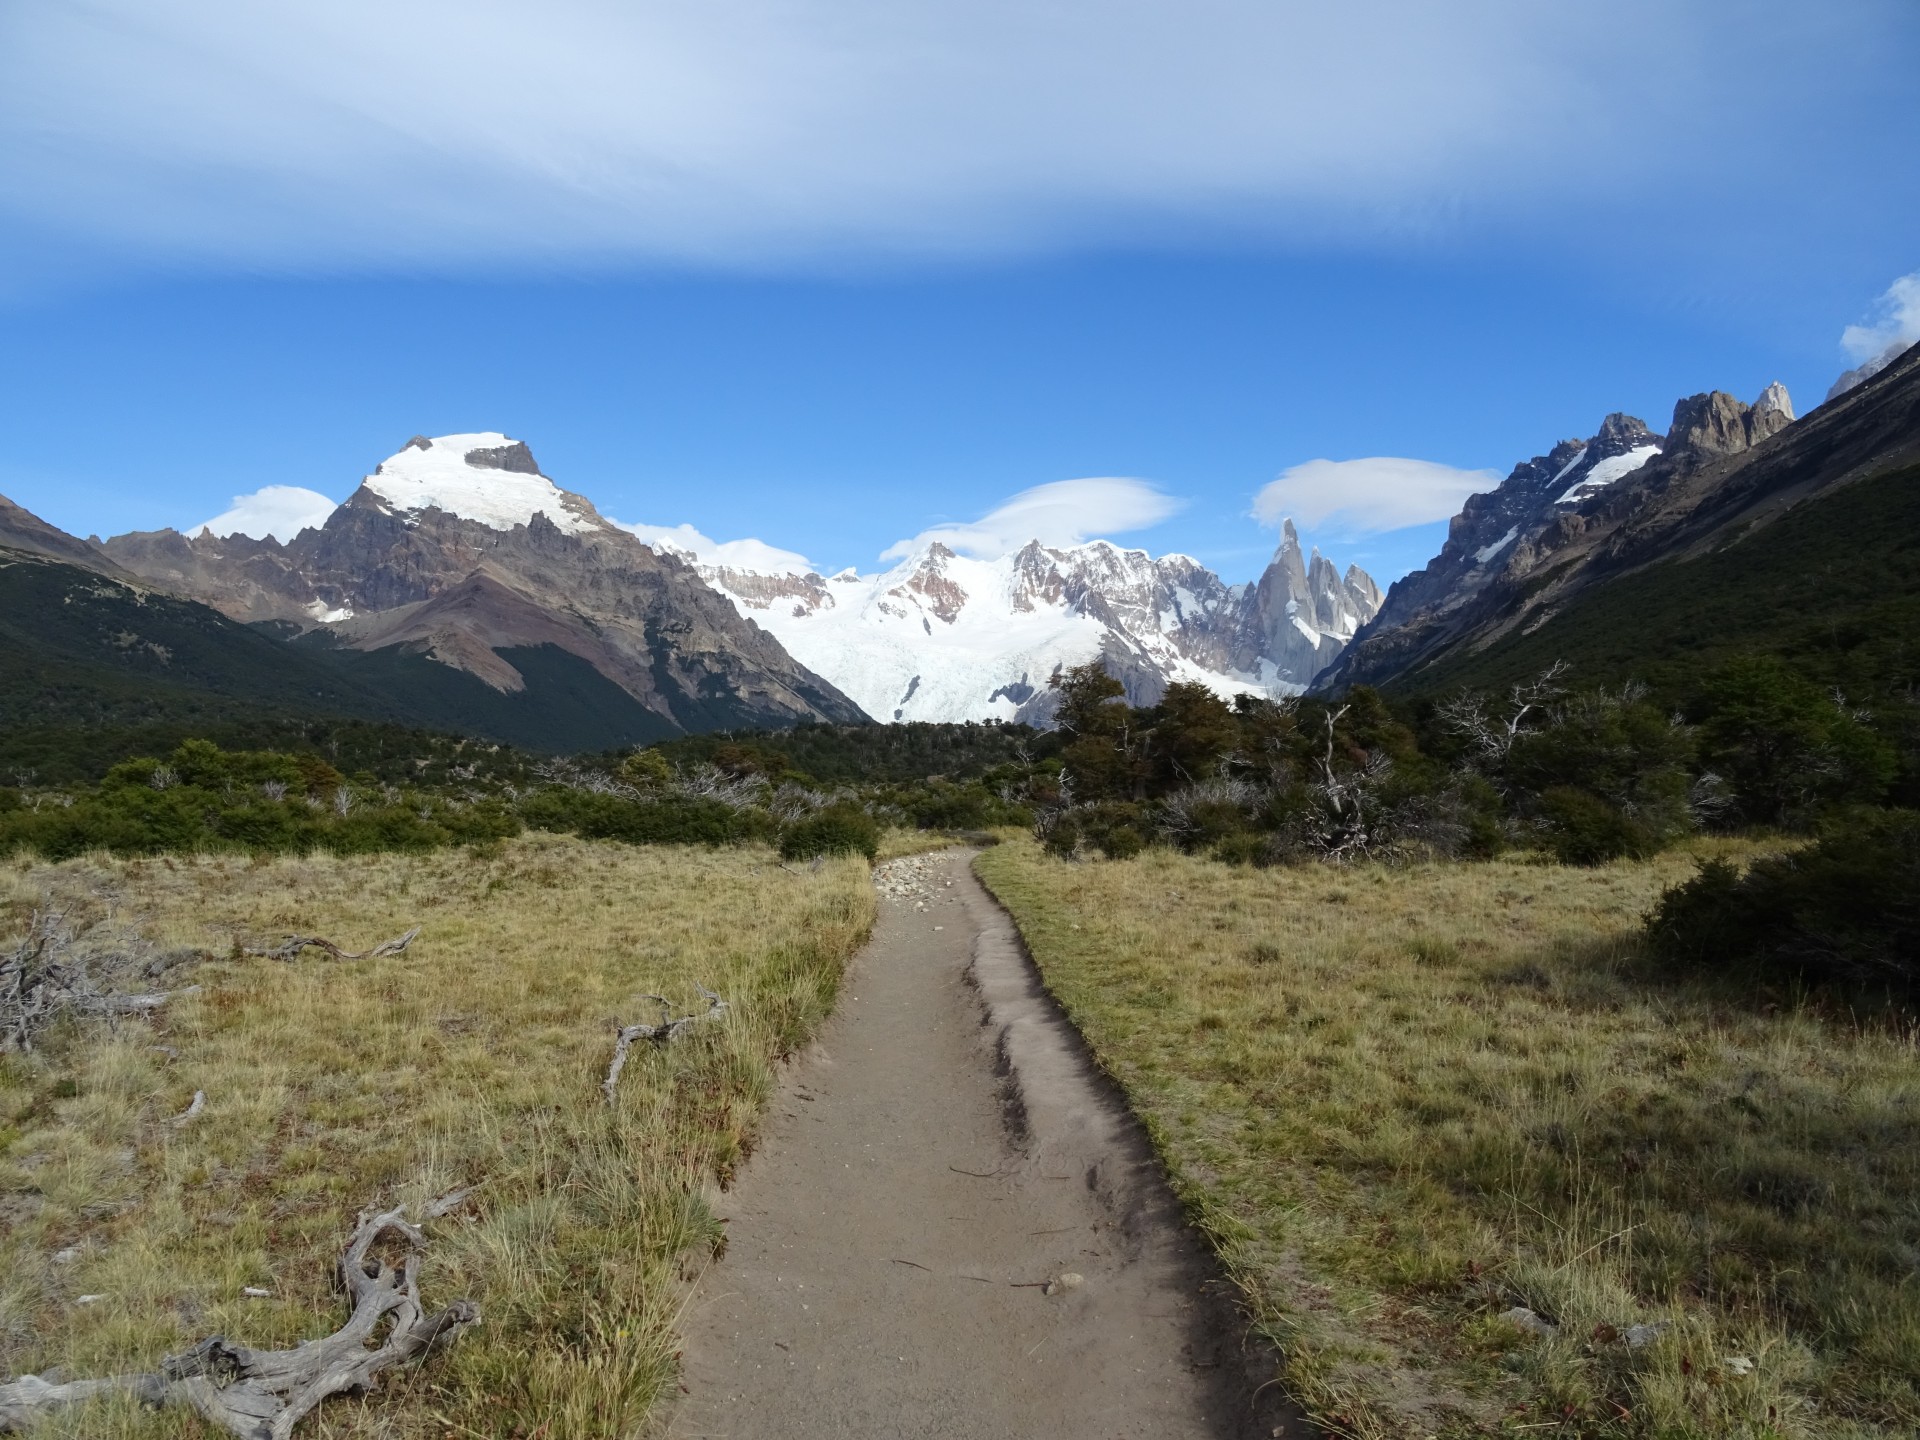 Walking to Laguna Torre. The unloved Ice Cream Mountain on the left. I feel sorry for him.